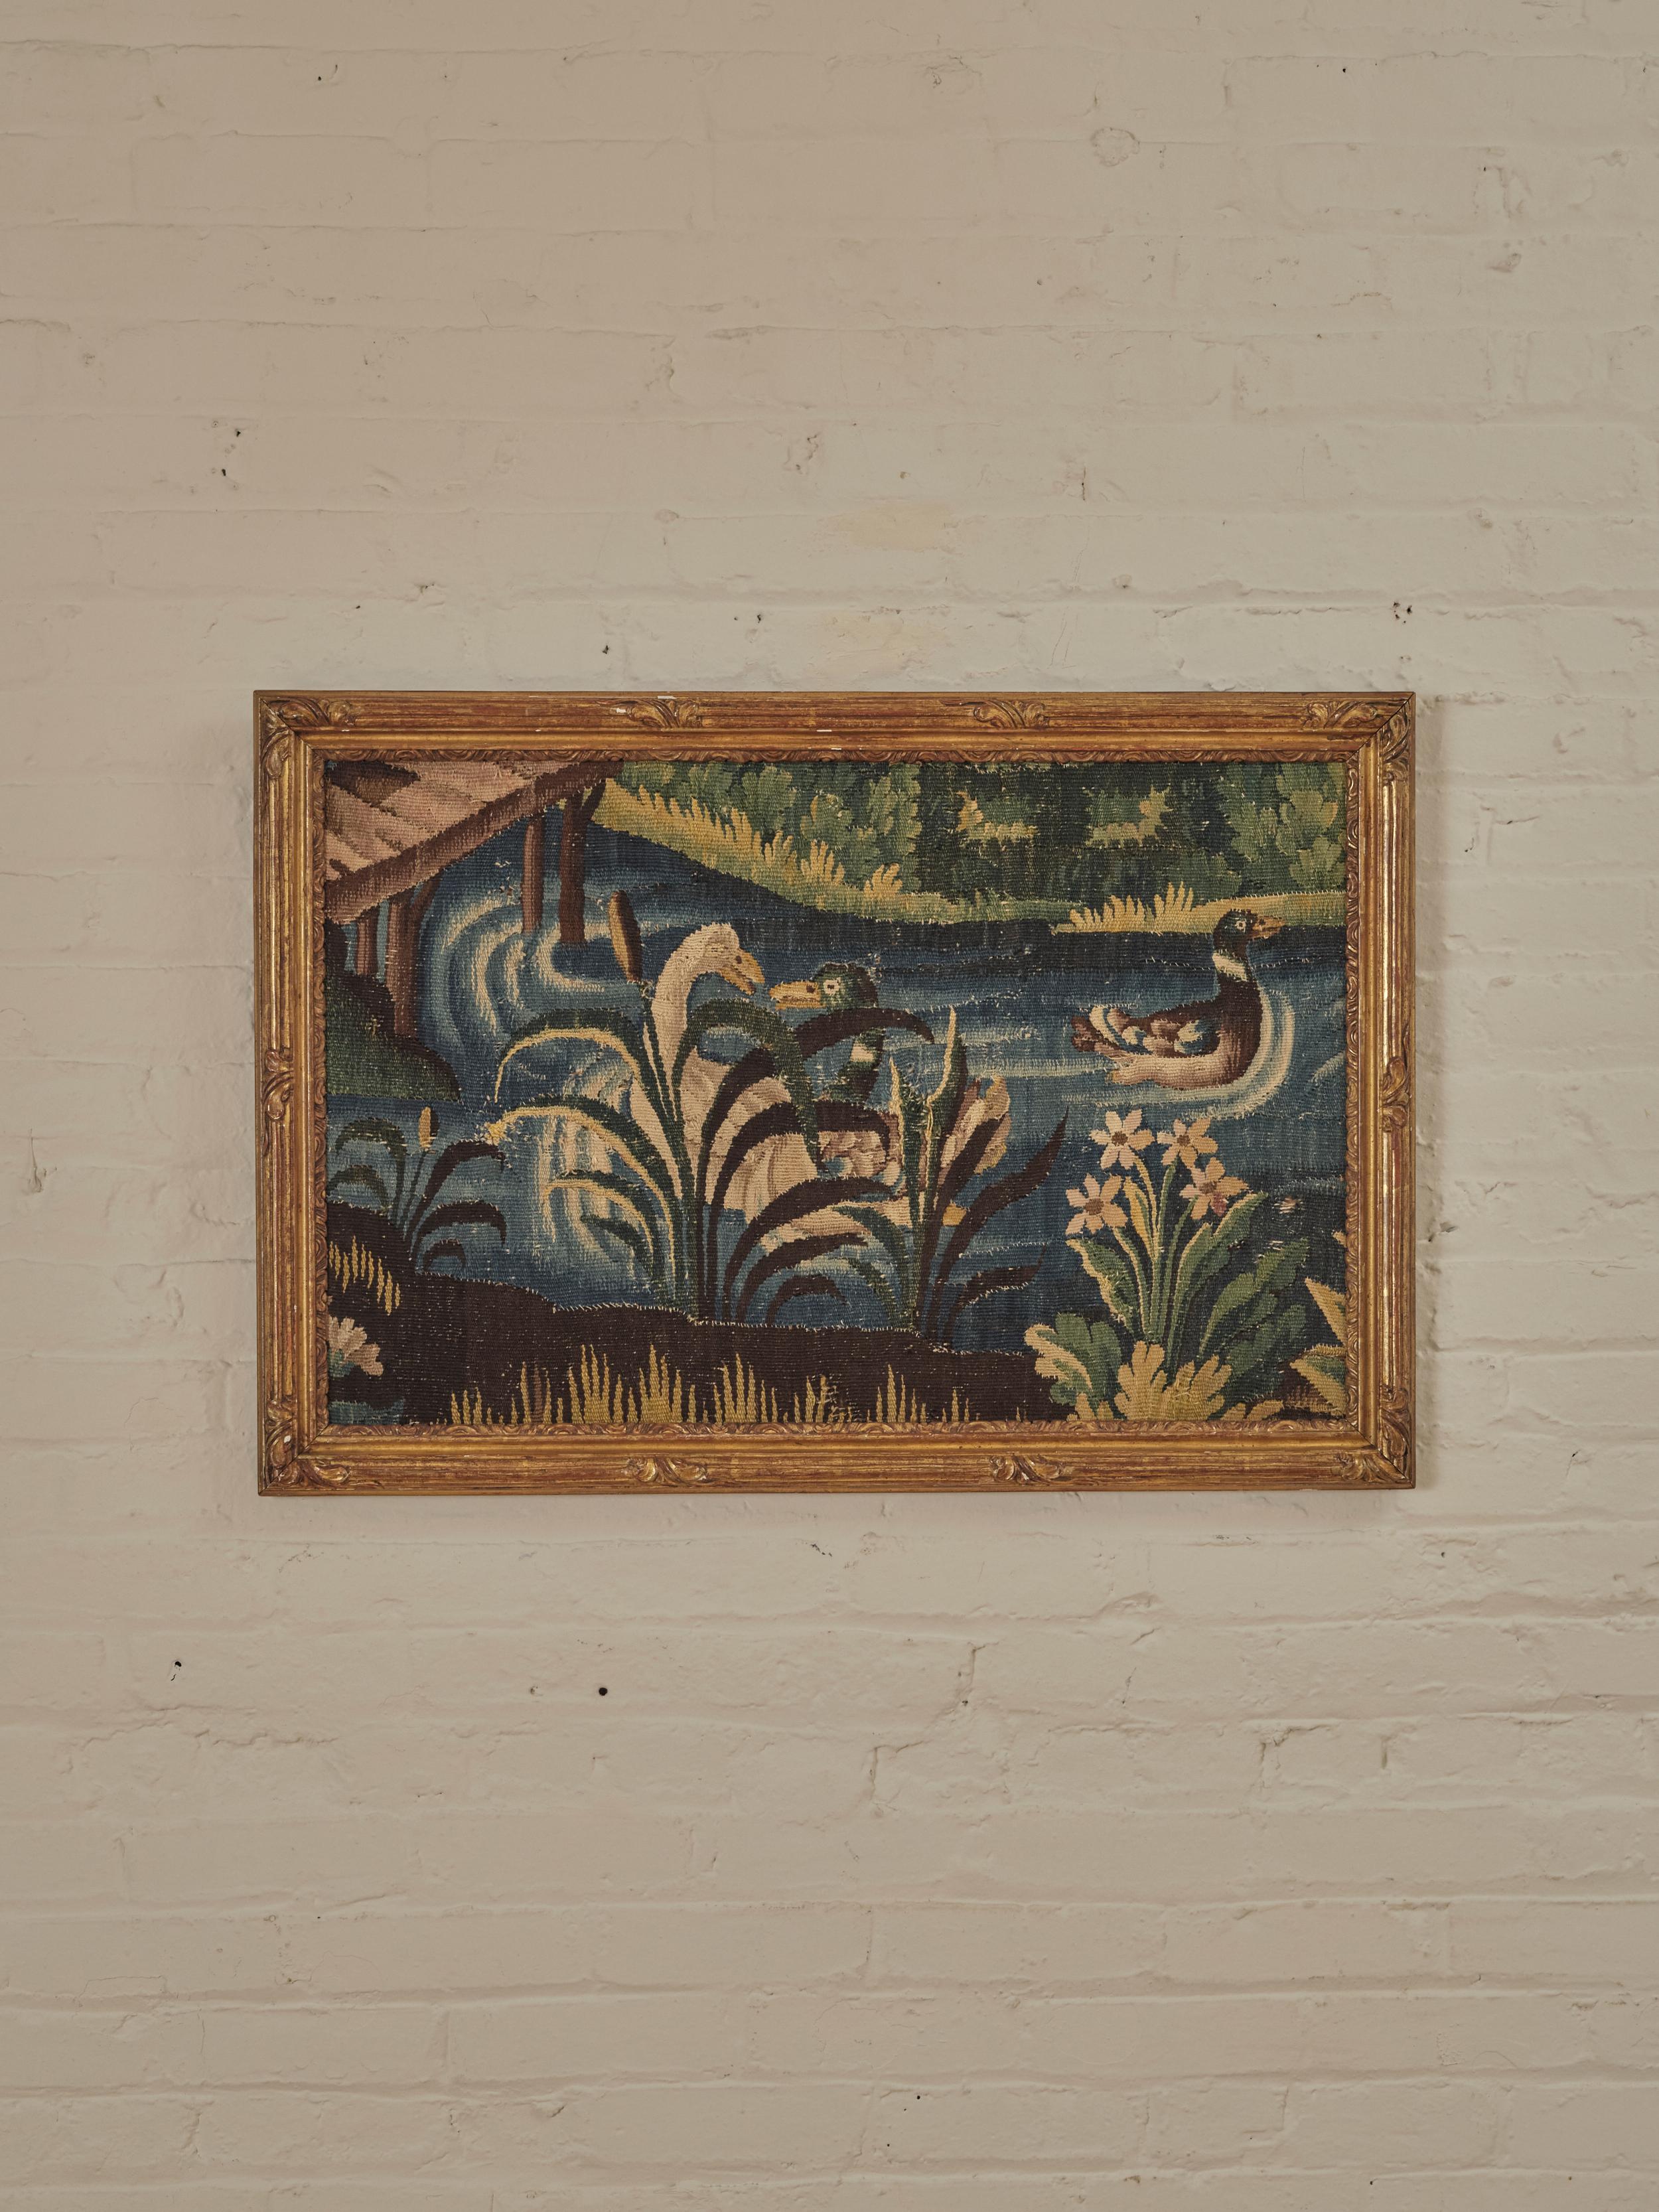 A Pair of Riverside Landscape Framed Tapestries. Each fragment has been meticulously worked in multicolored wool and paints a riverside scene, complete with charming ducks and lush vegetation. The artworks are encased in carved and gilt wooden